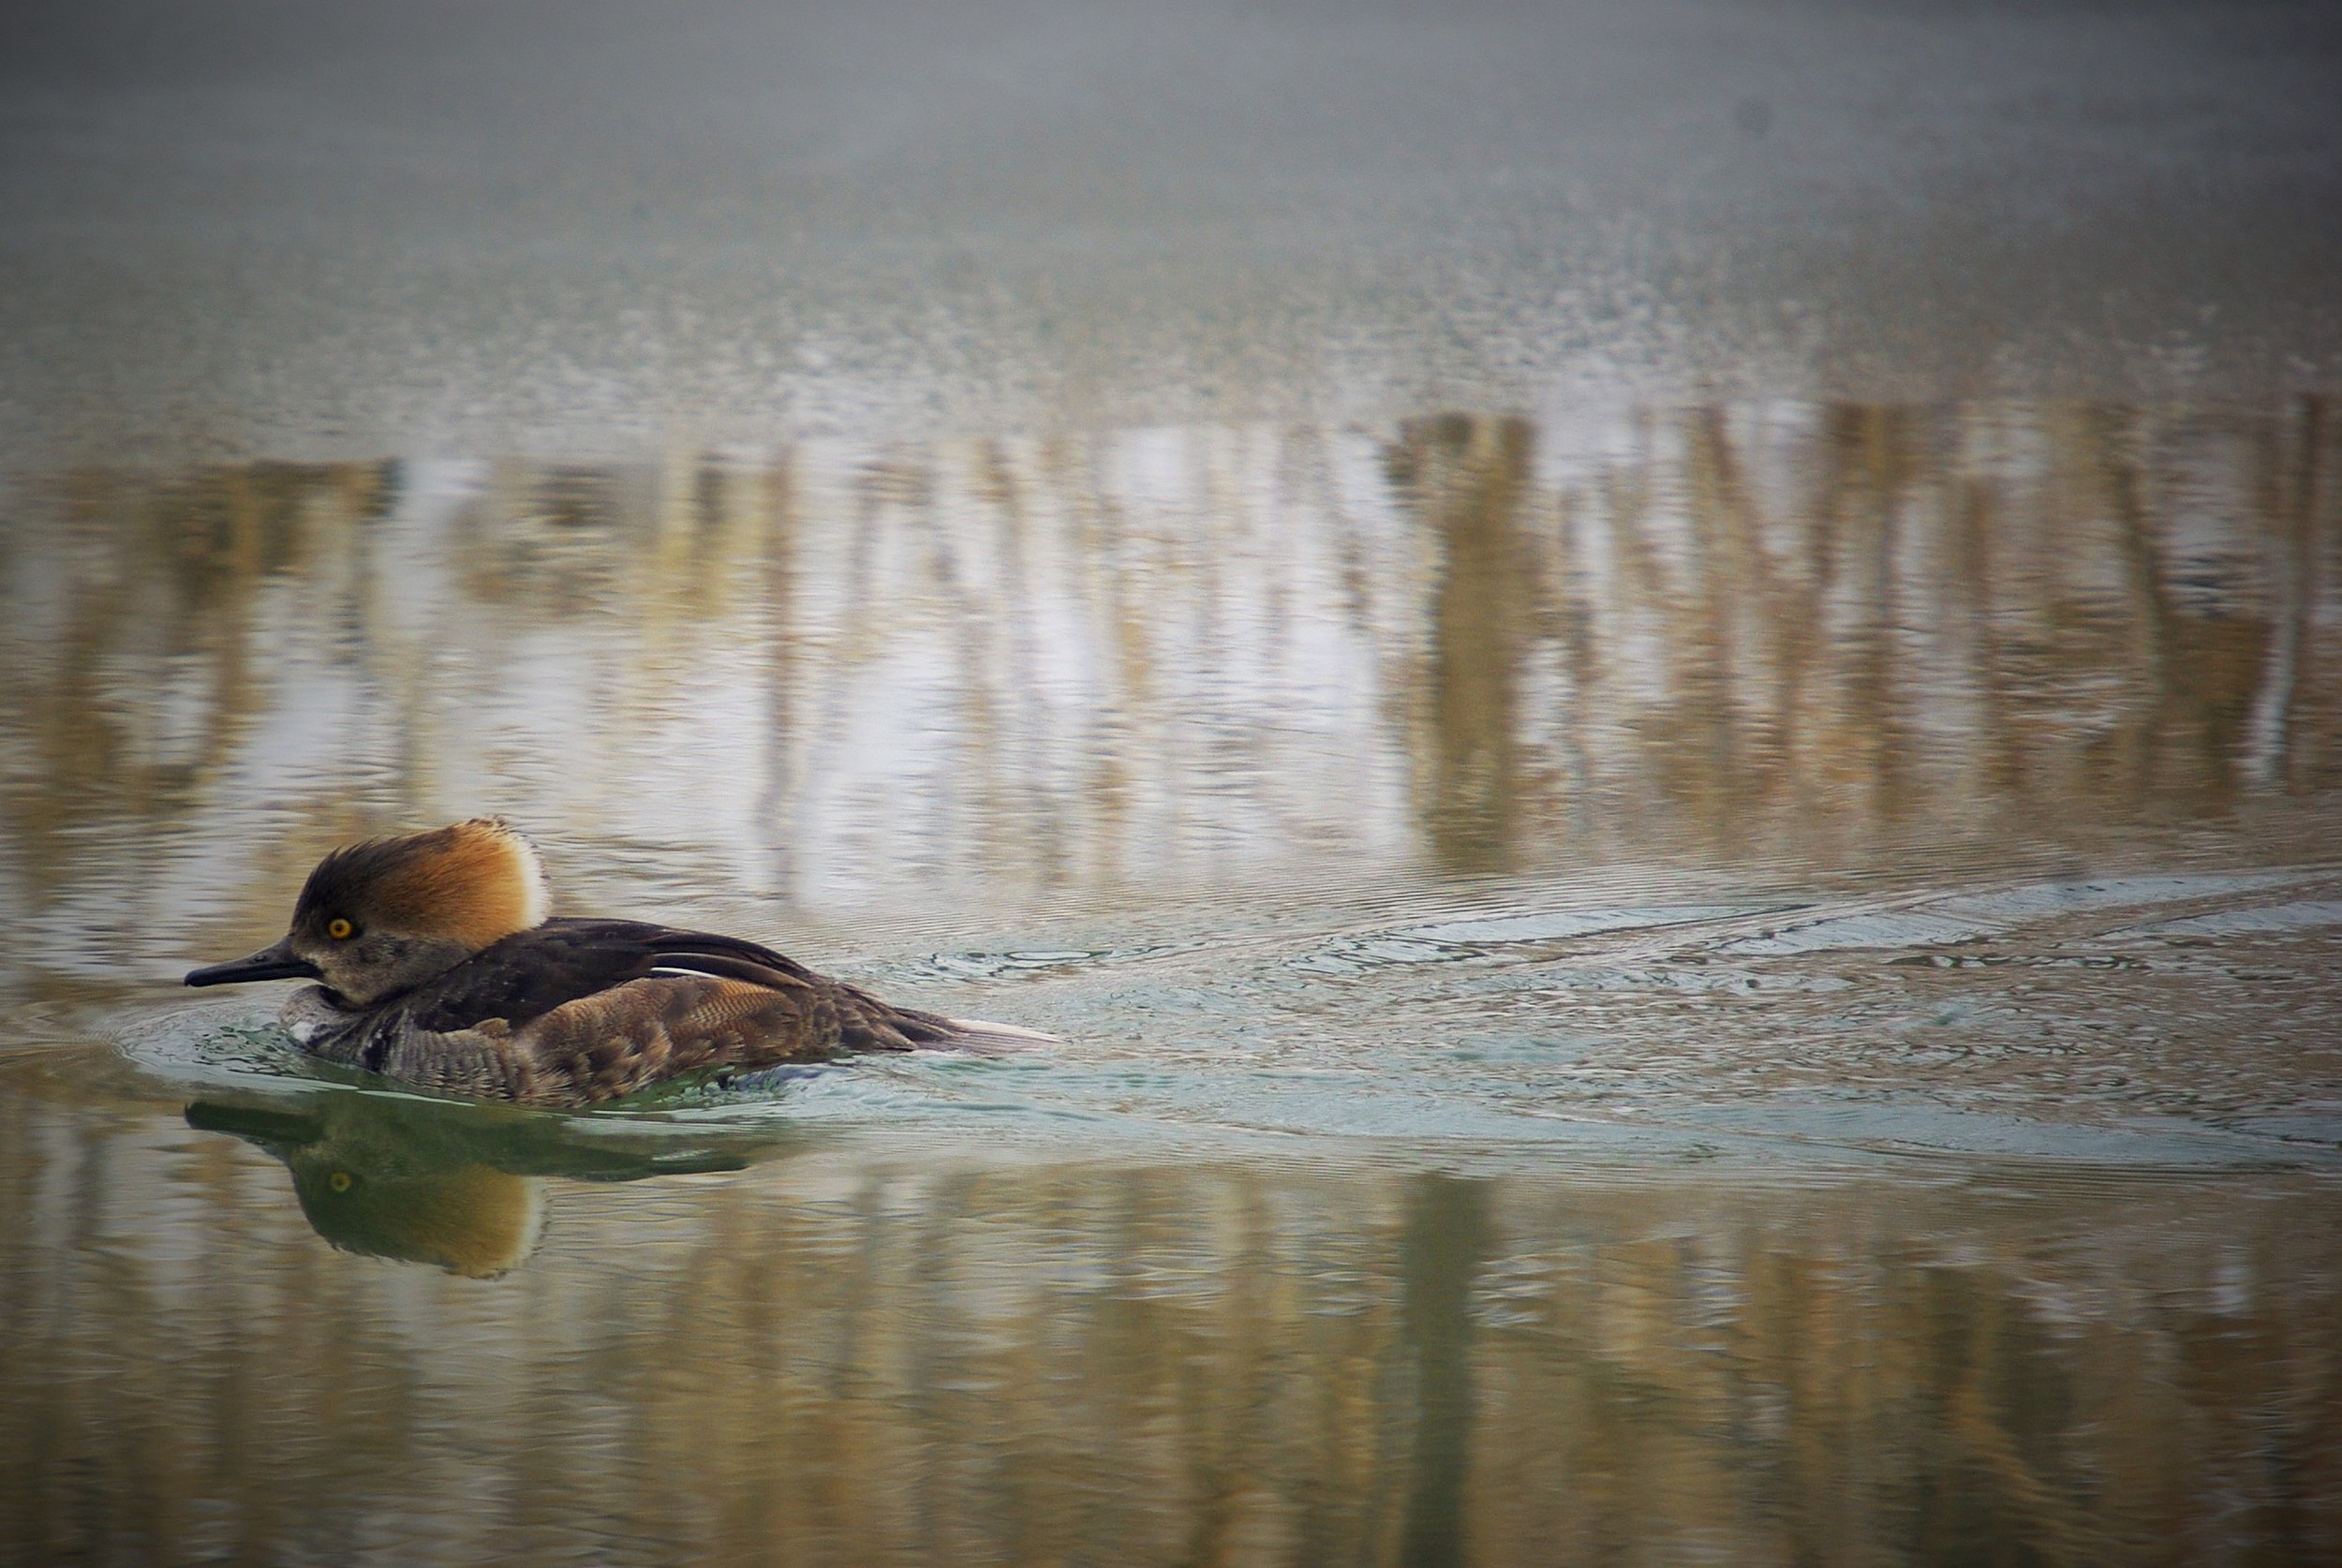  Migratory and wintering waterfowl such as hooded merganser, canvasback, red-head and ring-neck ducks, are a beautiful common sight in Post-Dispatch Lake. Photograph by Patrick Greenwald. 